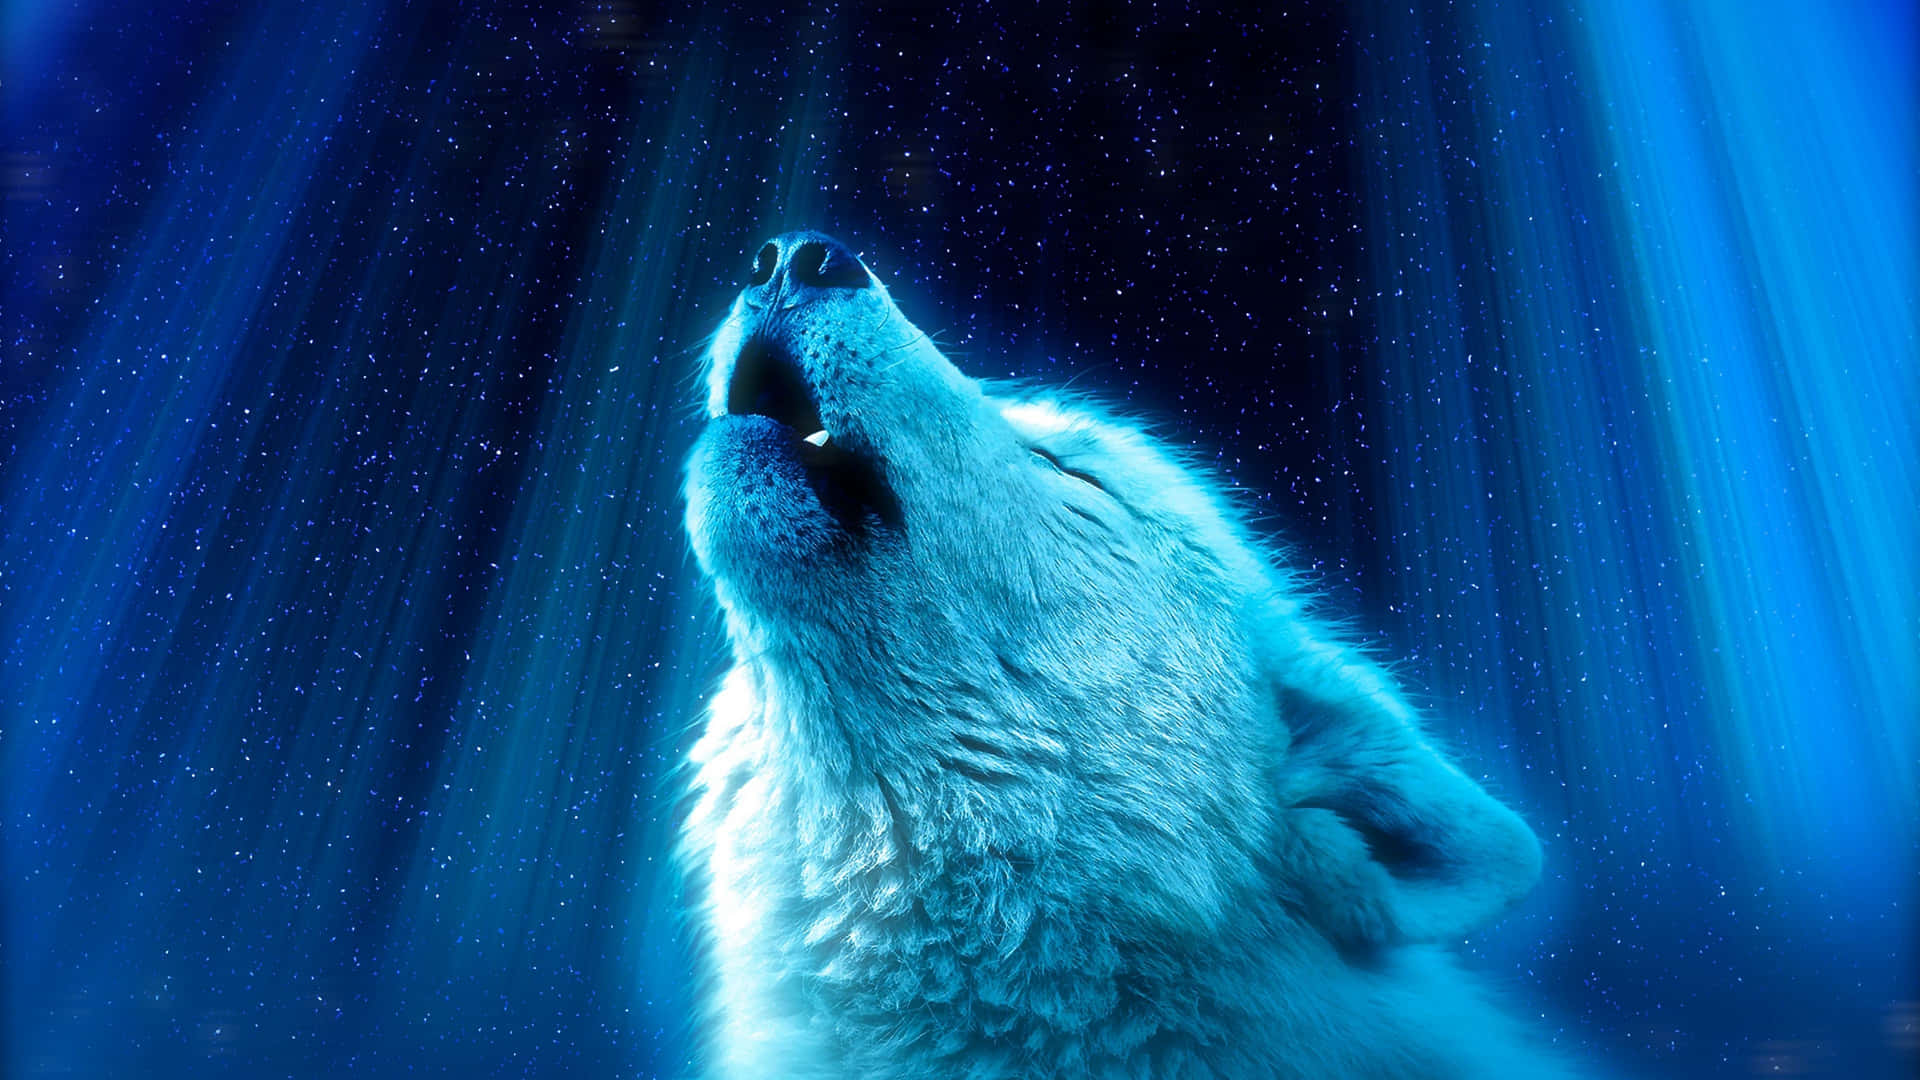 A wild Howling Wolf stands atop a mountain gloriously howling at the night sky.